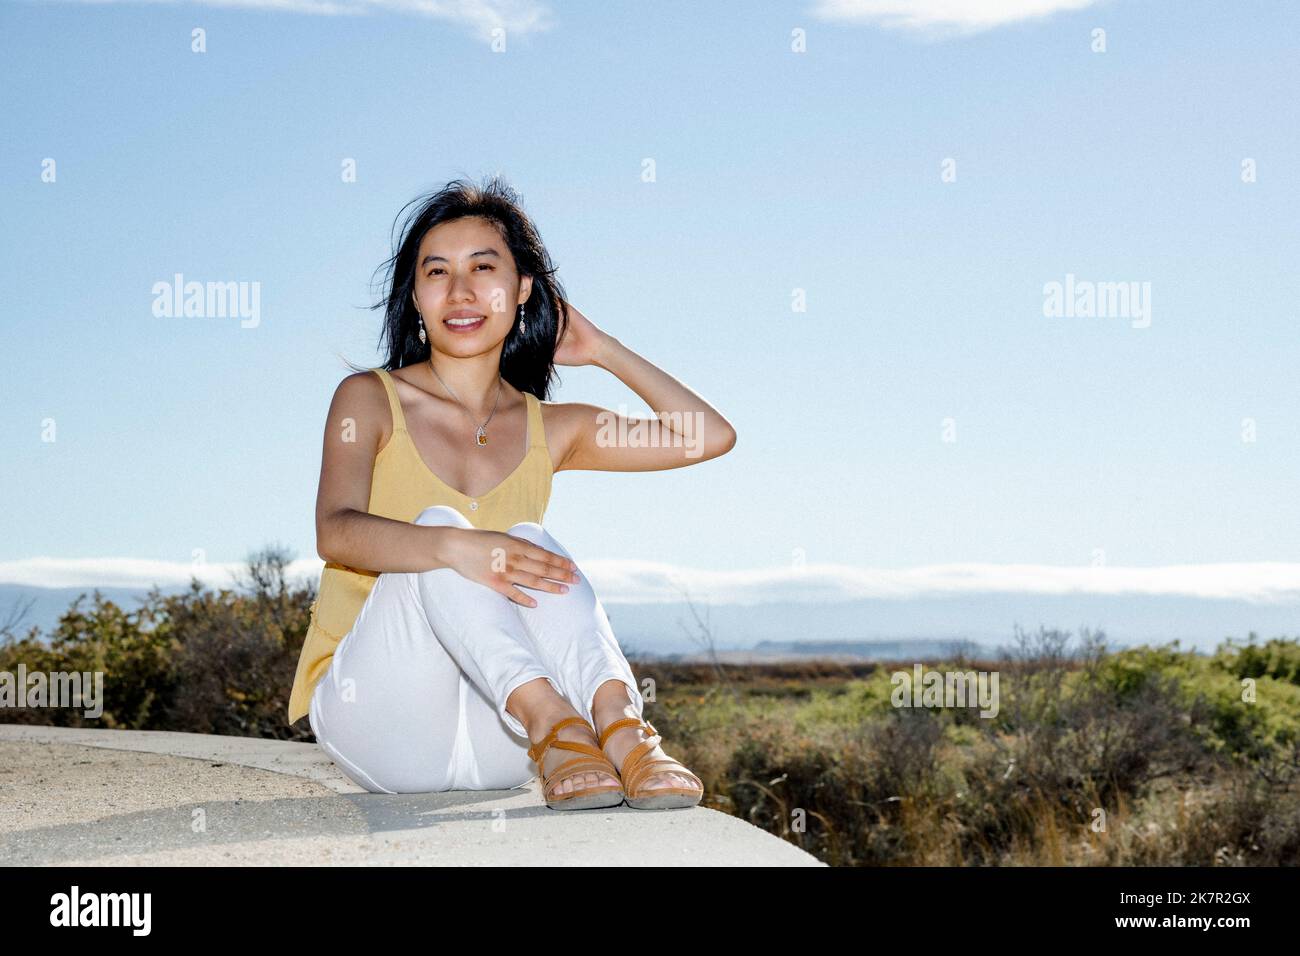 Young Woman Sitting on a Wall Overlooking a Marshland Stock Photo